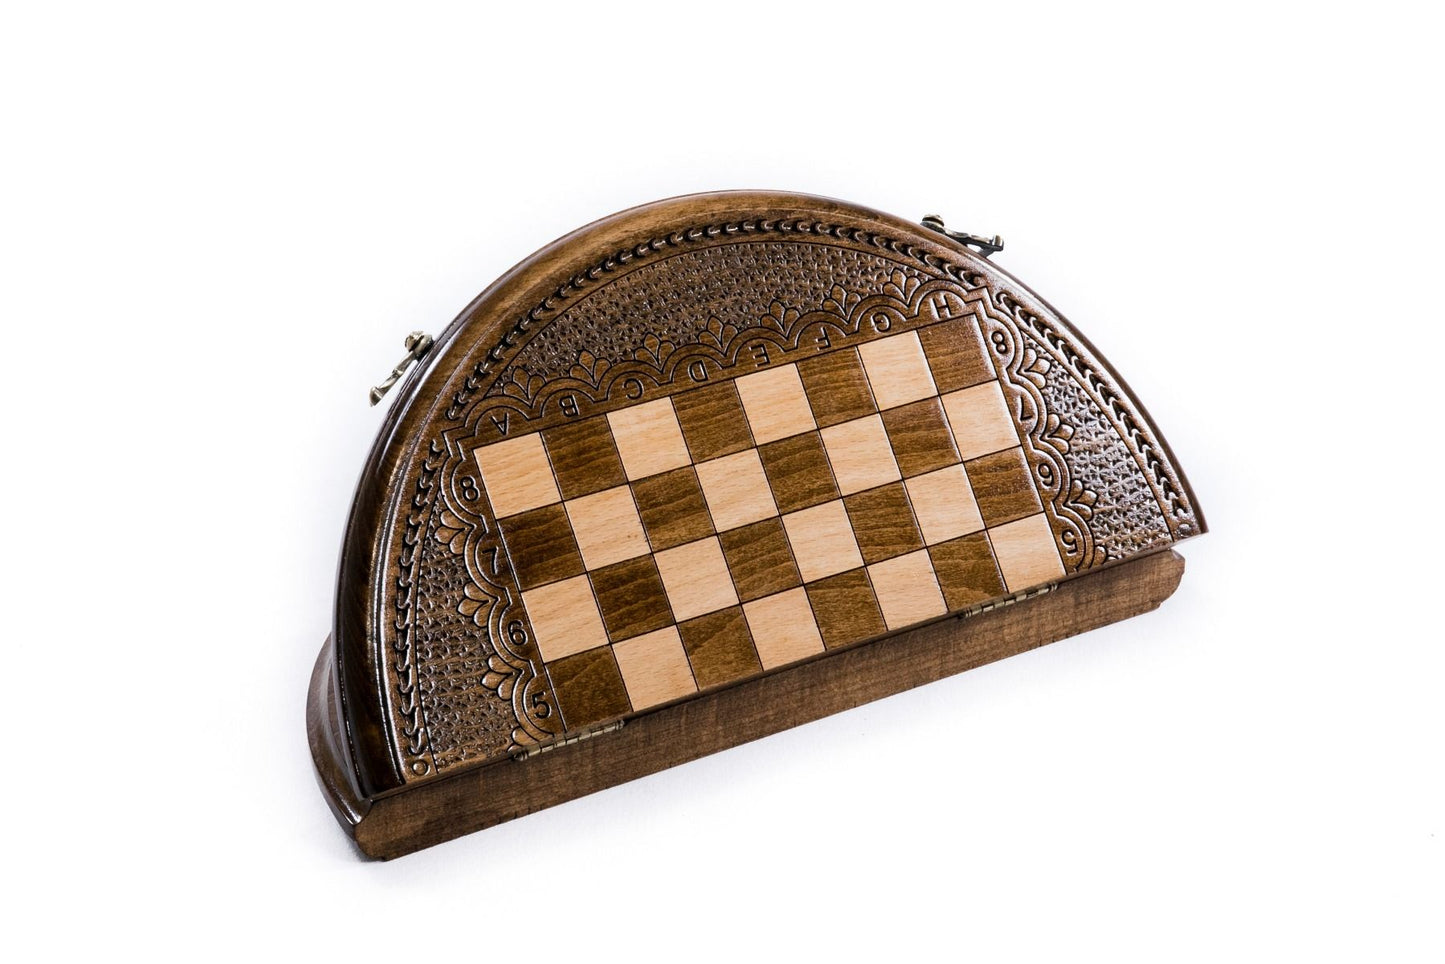 Engage in the art of strategy with a unique wooden chess set, featuring a circular board that challenges traditional gameplay.